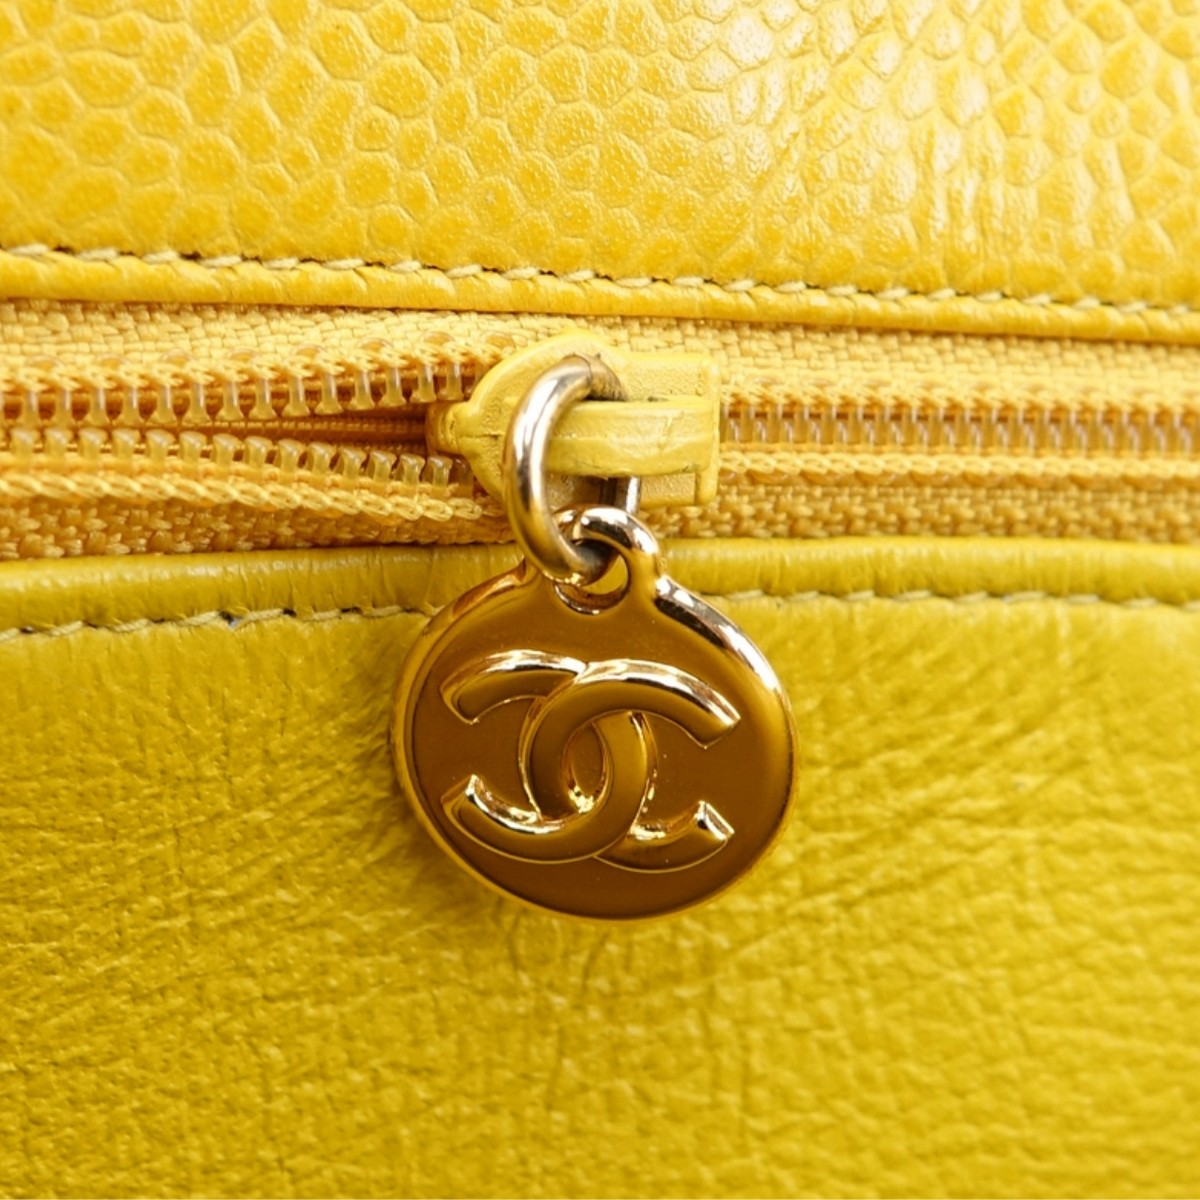 Chanel Yellow Caviar Leather Vintage Tote